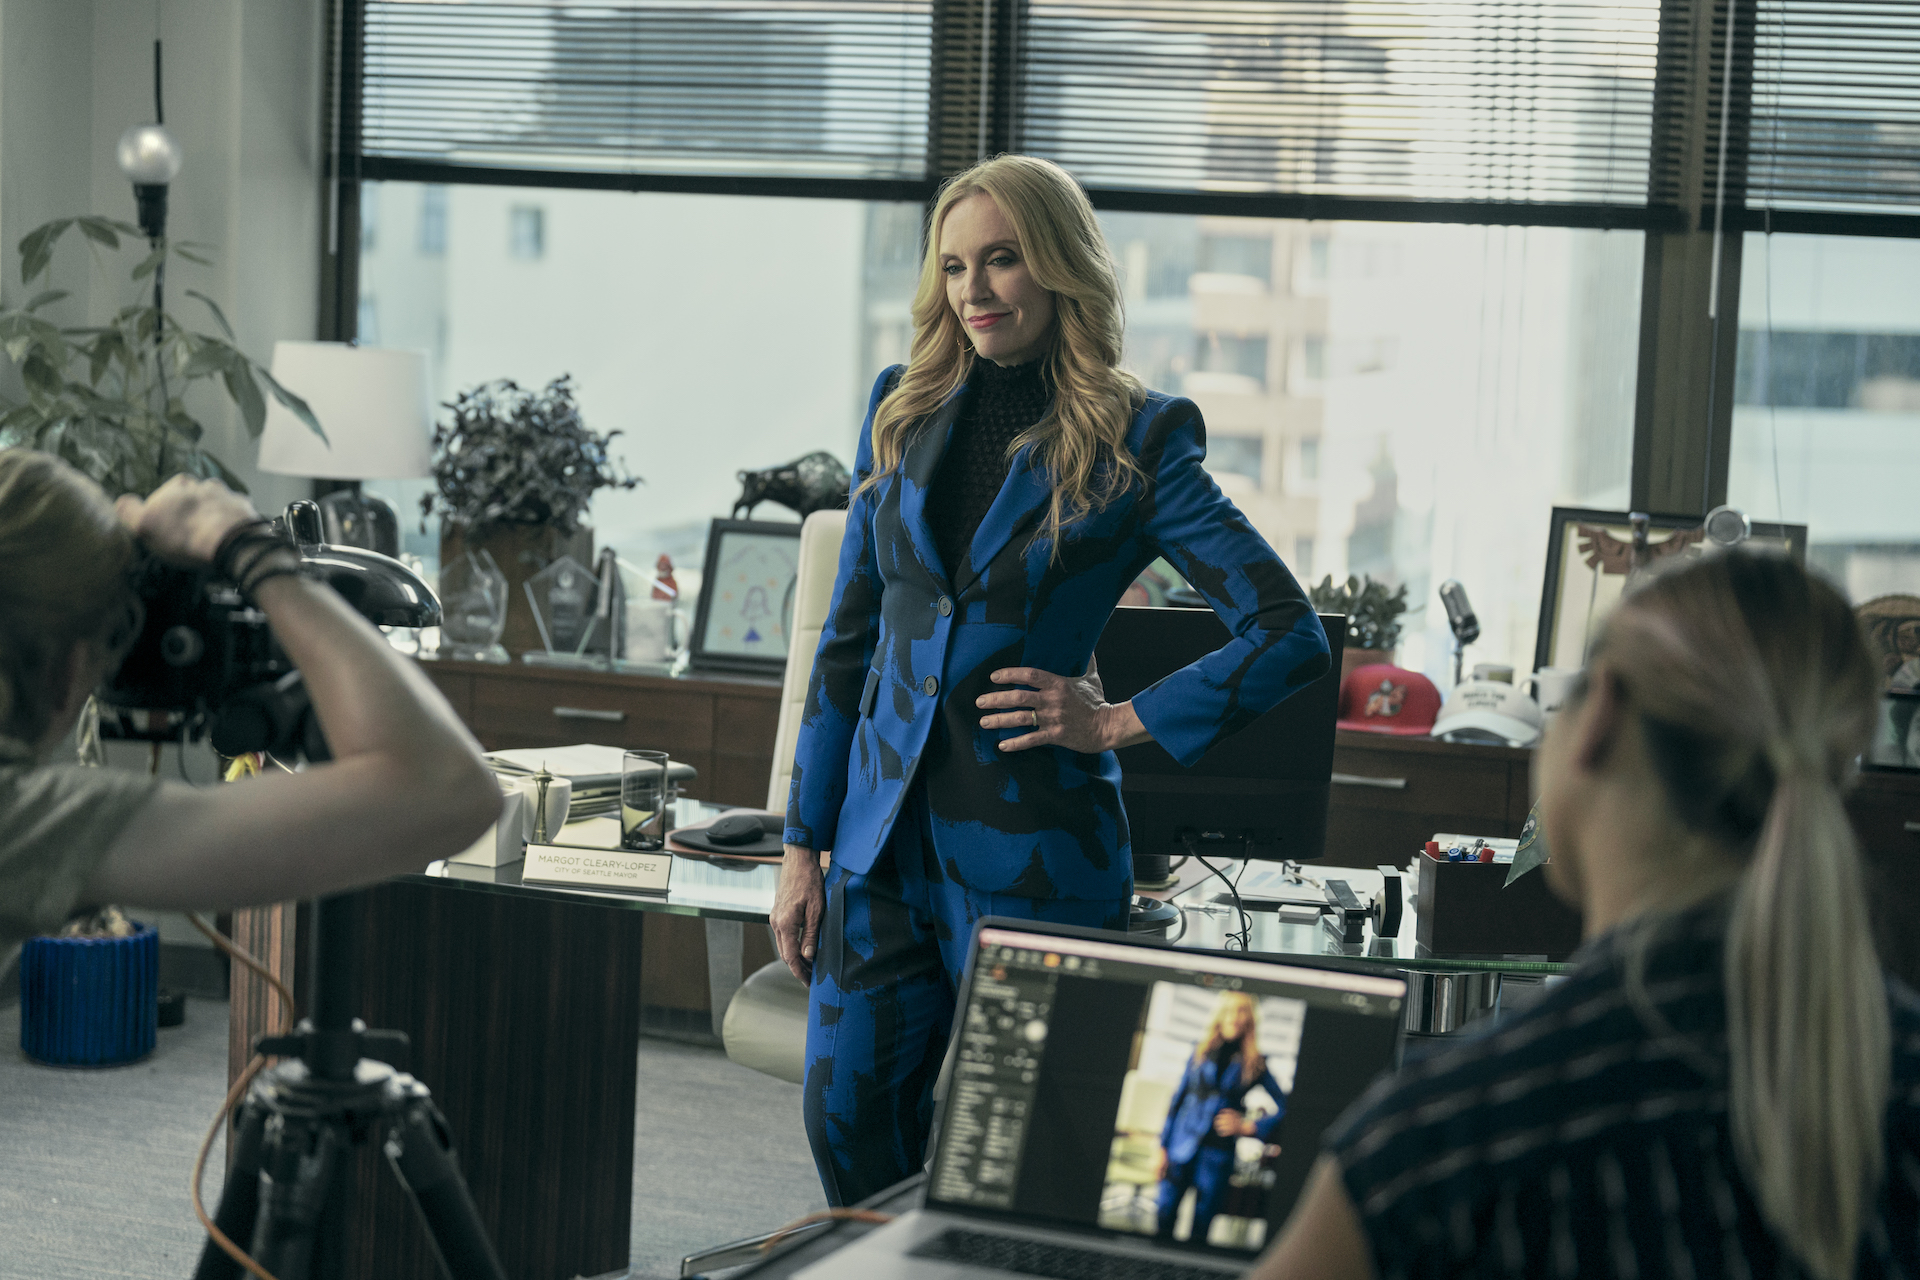 Toni Collette as Margot Cleary-Lopez in 'The Power'. Image: courtesy of Prime Video